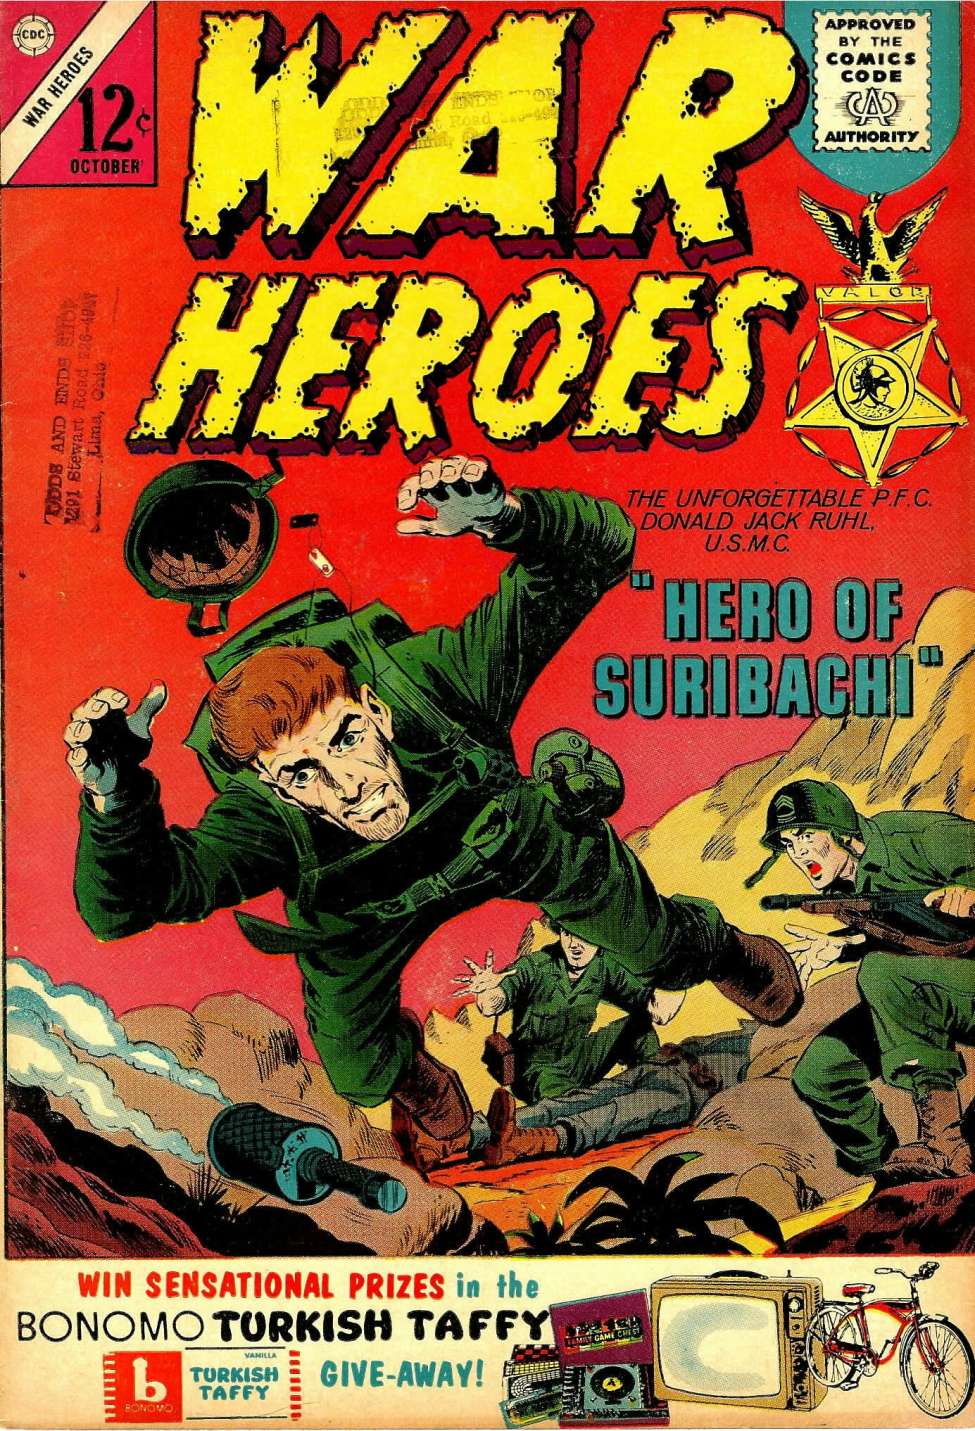 Comic Book Cover For War Heroes 5